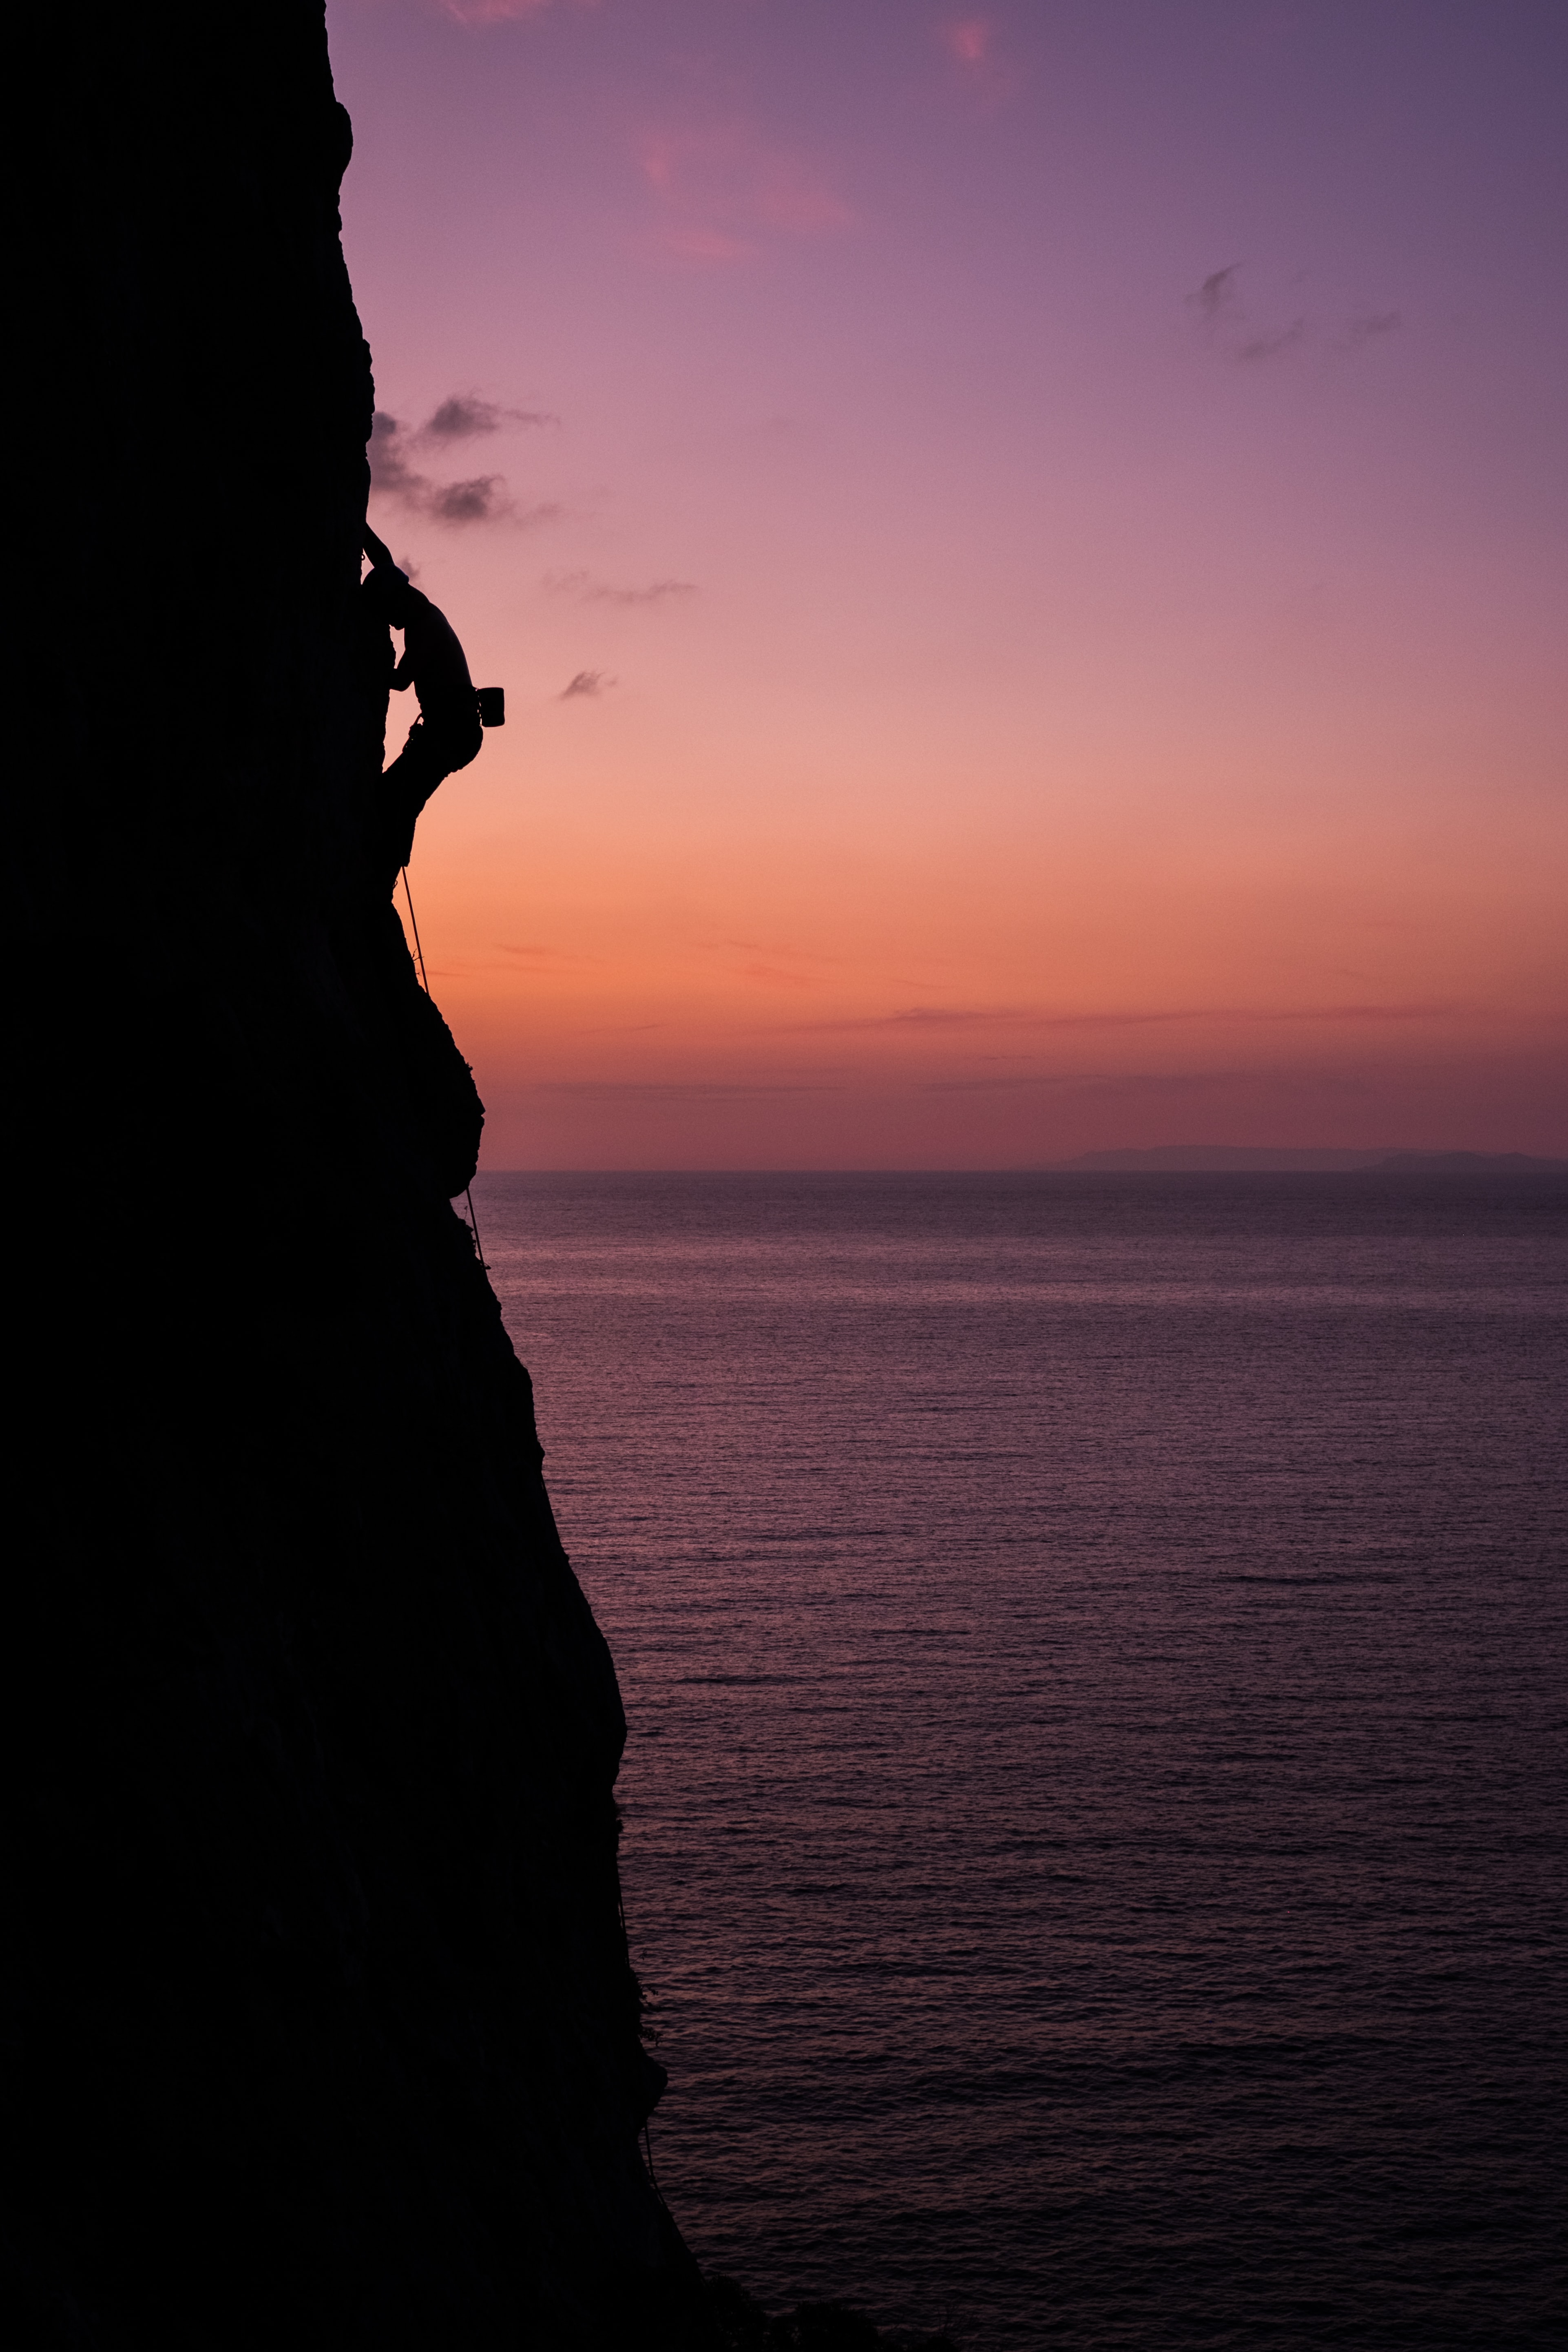 Climbers on a cliff above the Mediterranean Sea in the sunset.